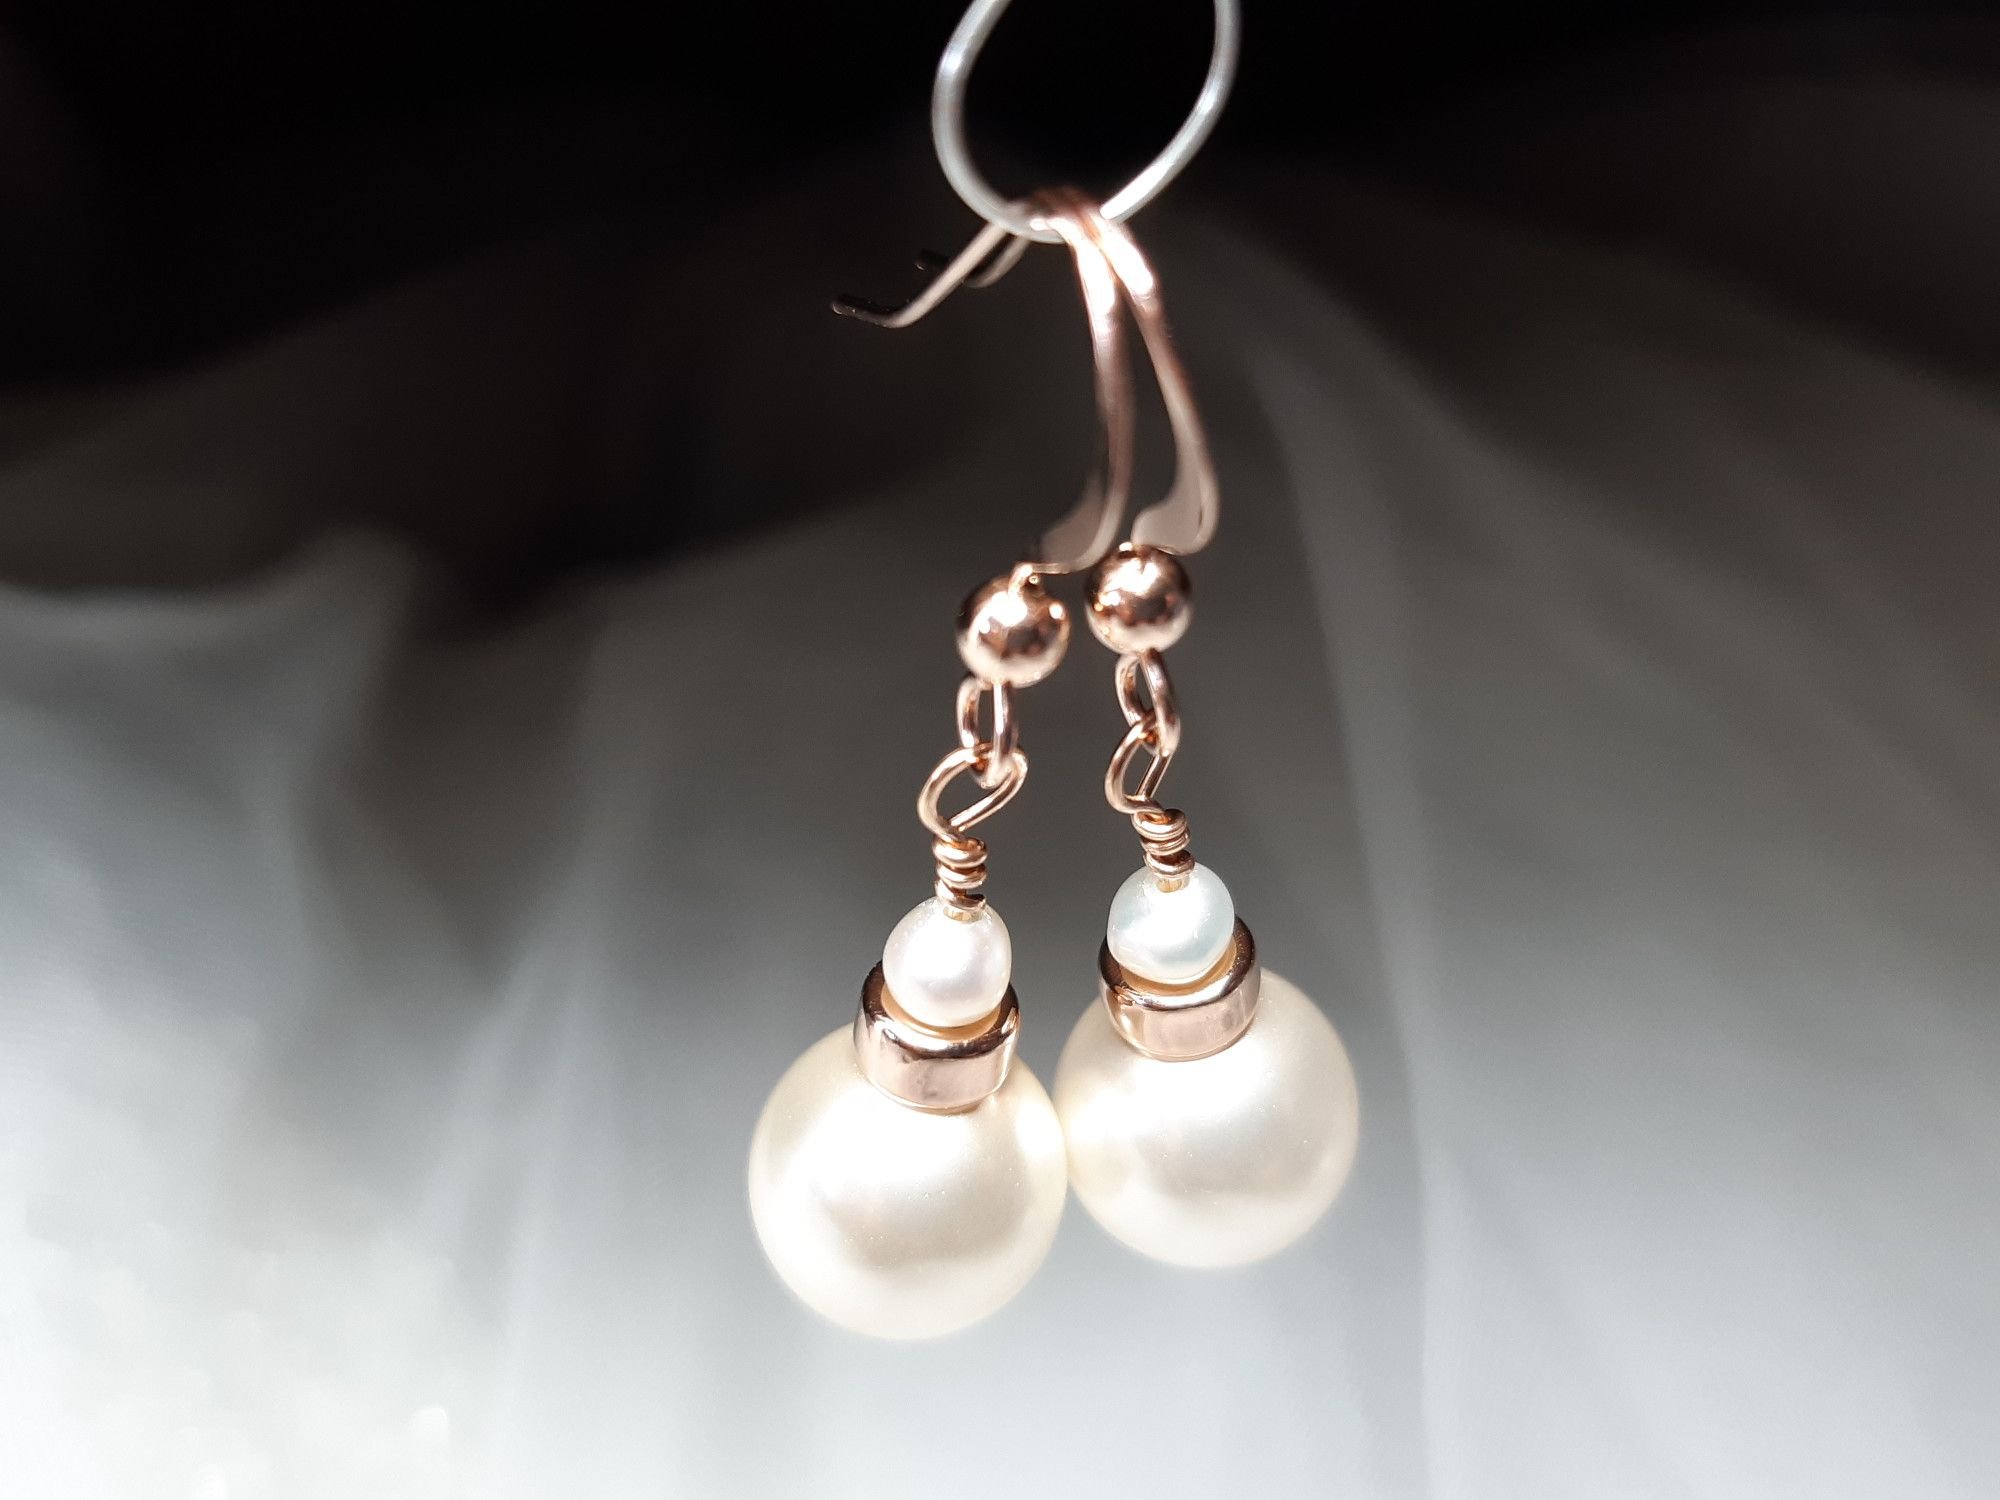 Occasion-bridal-wedding-pearl earrings with rose gold-4